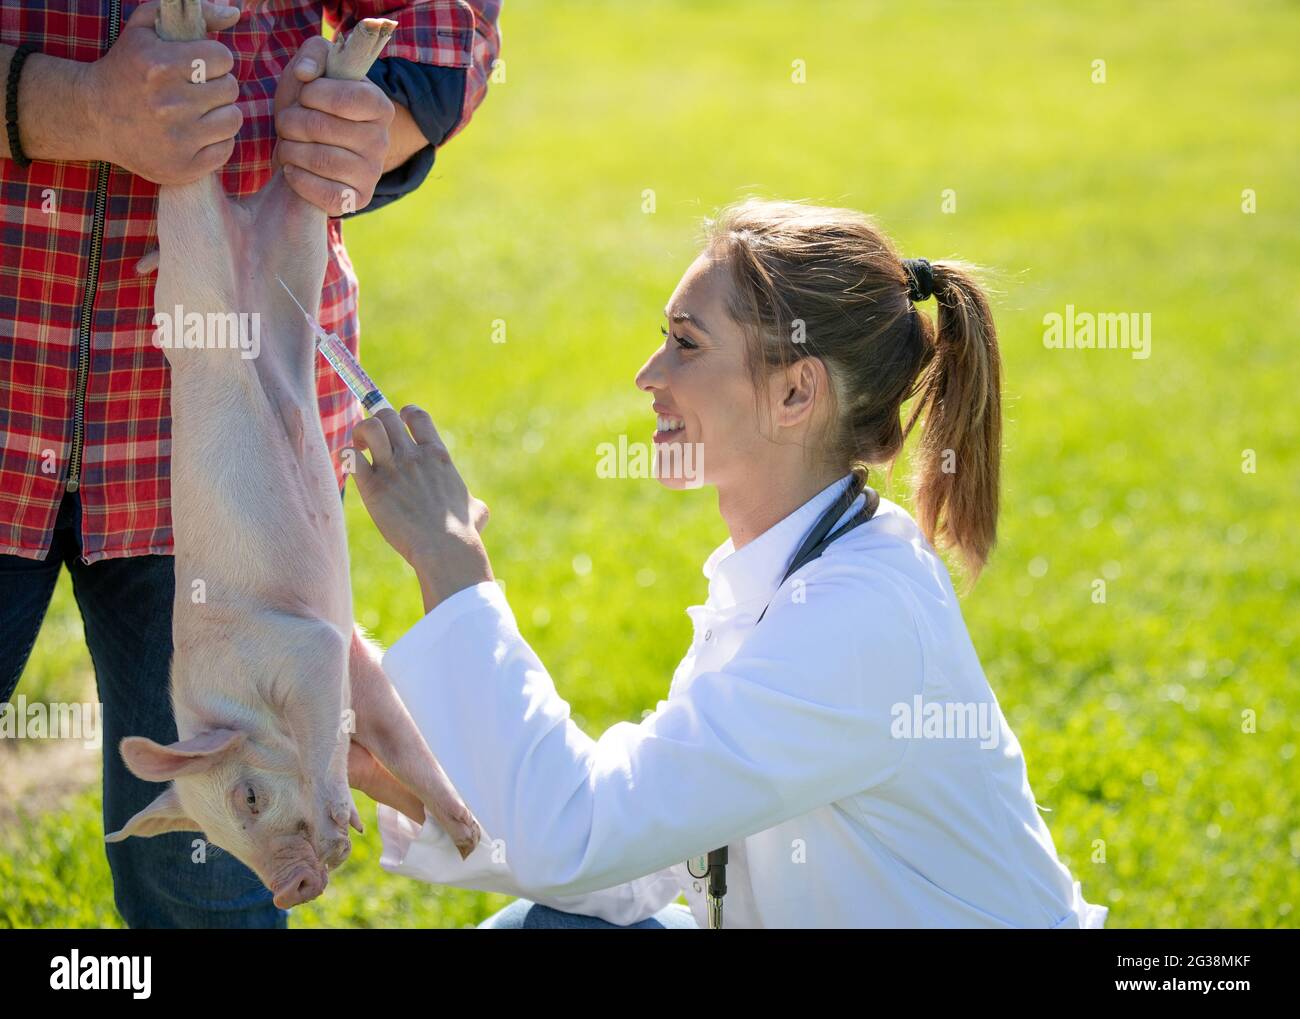 Female vet wearing white coat treating pig on farm. Woman doctor crouching giving injection to piglet. Stock Photo